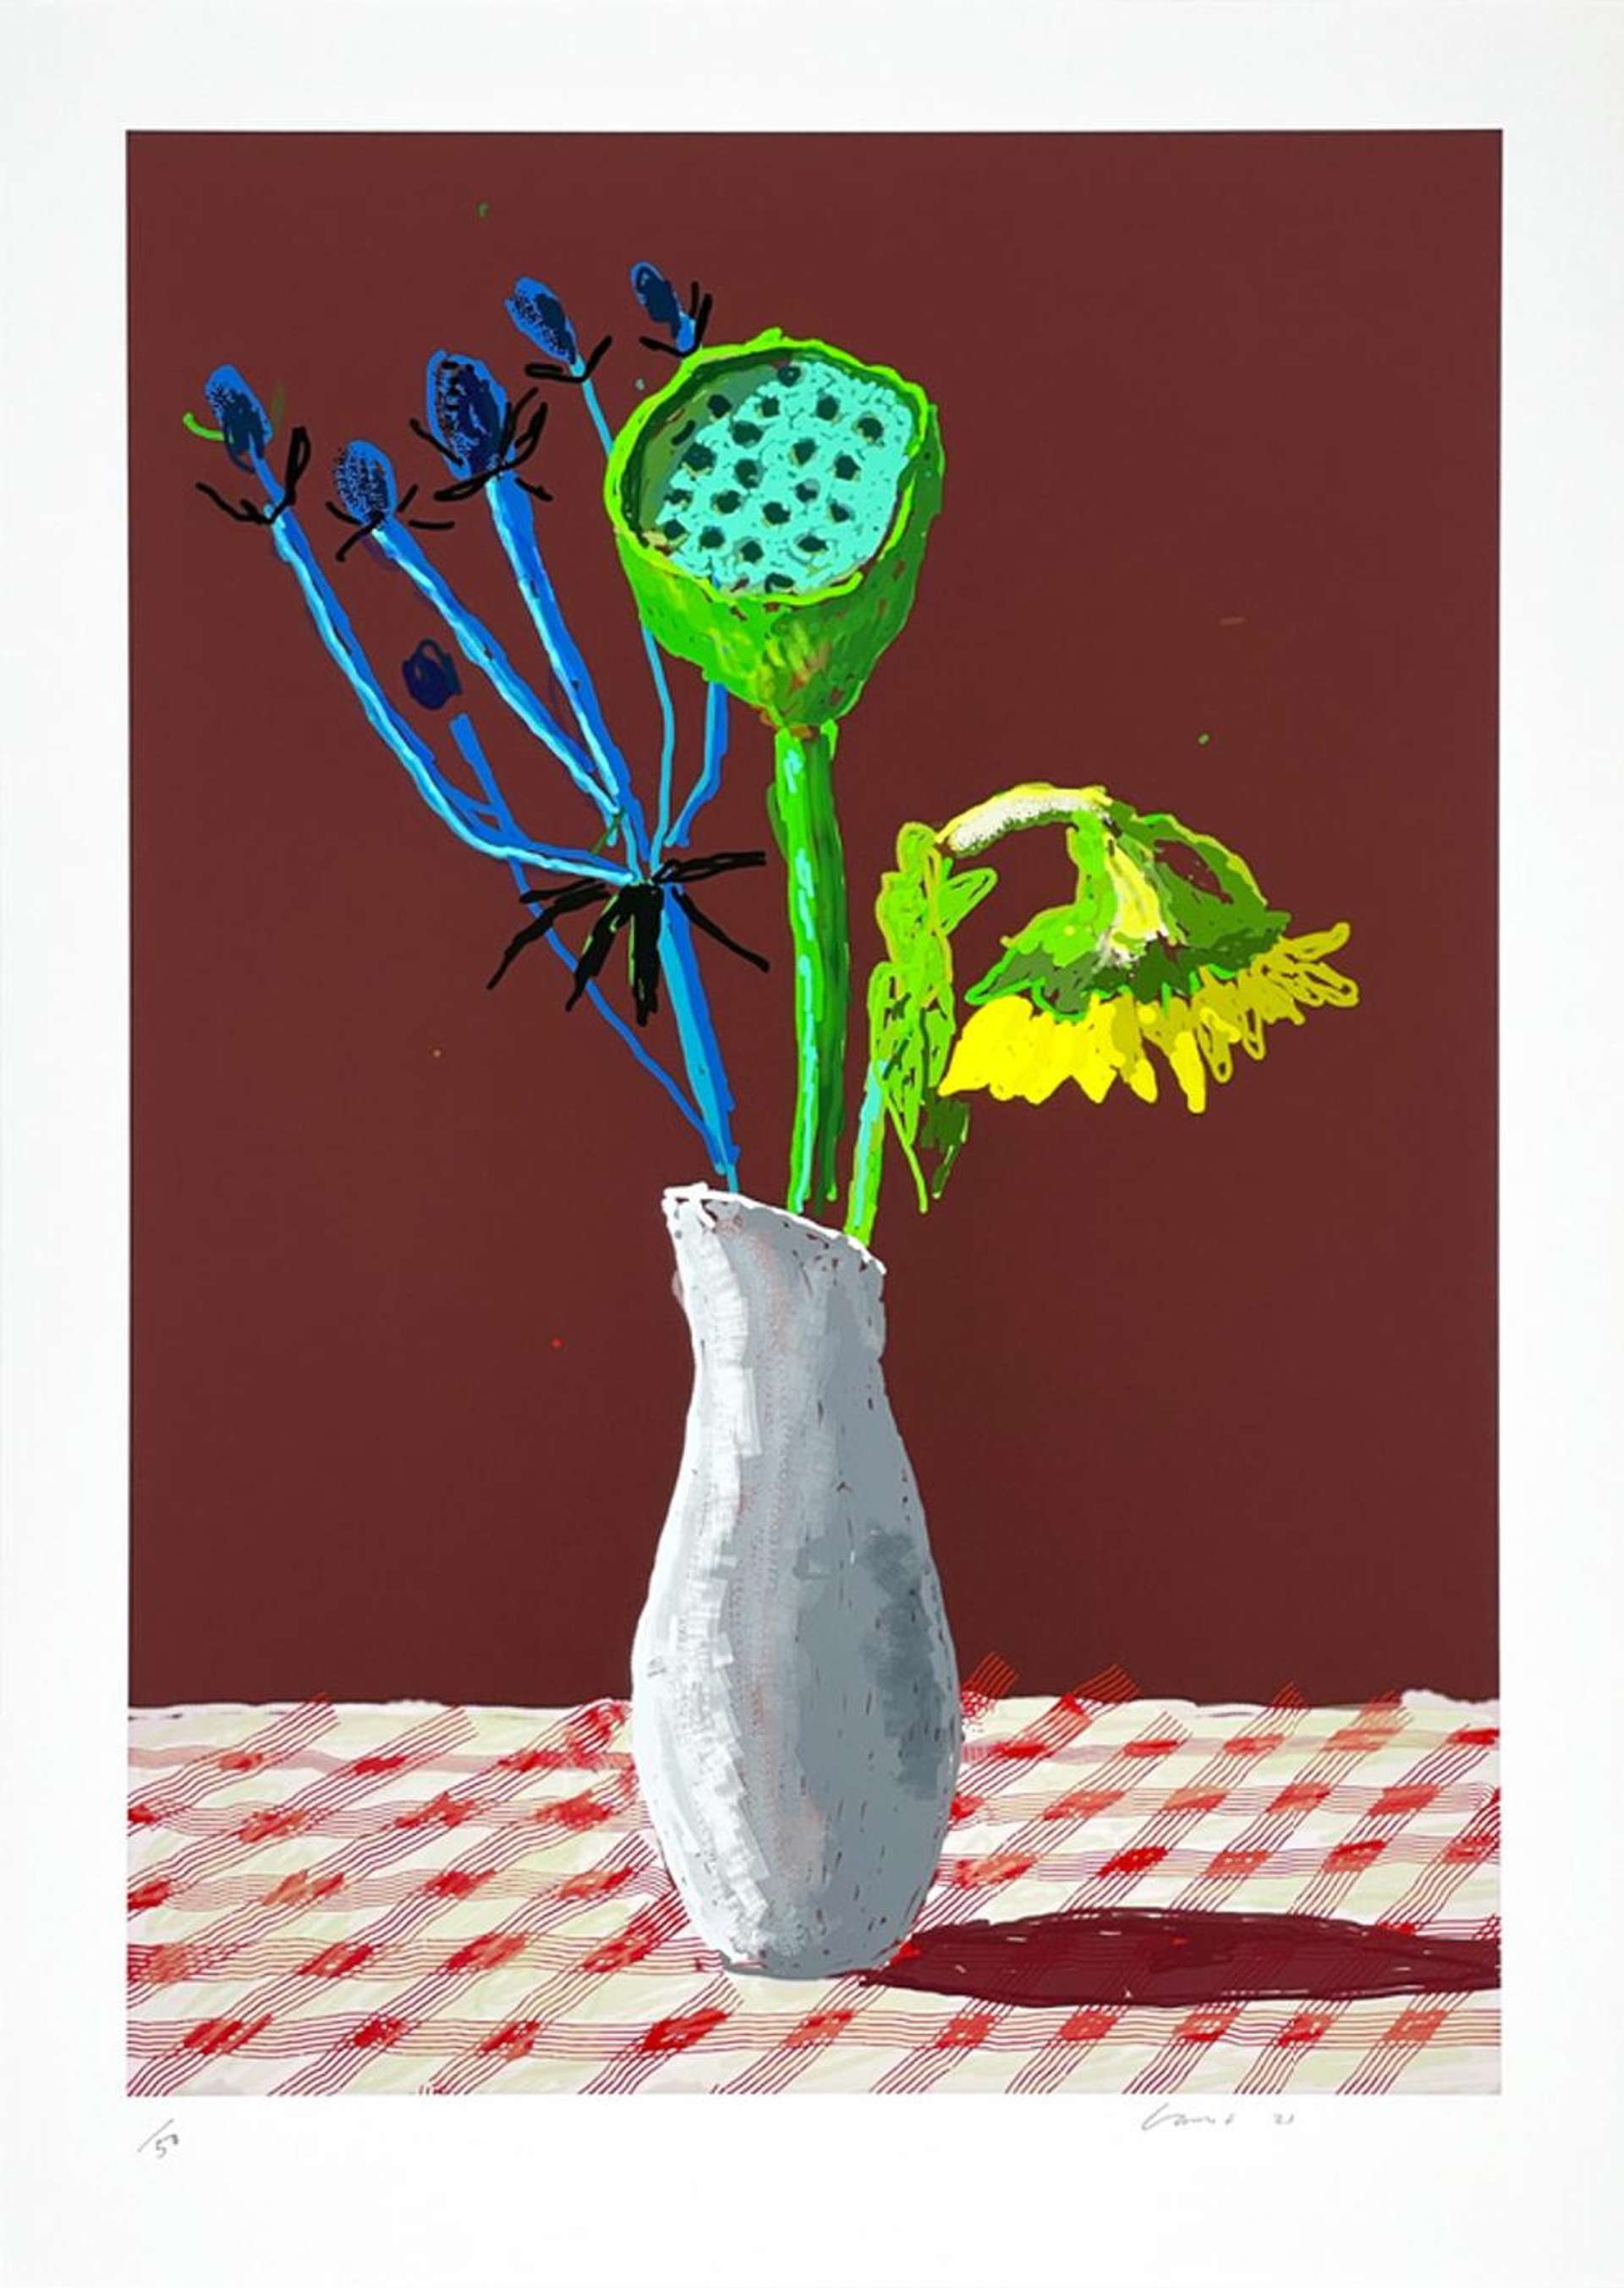 19th March 2021, Sunflower With Exotic Flower - Signed Print by David Hockney 2021 - MyArtBroker